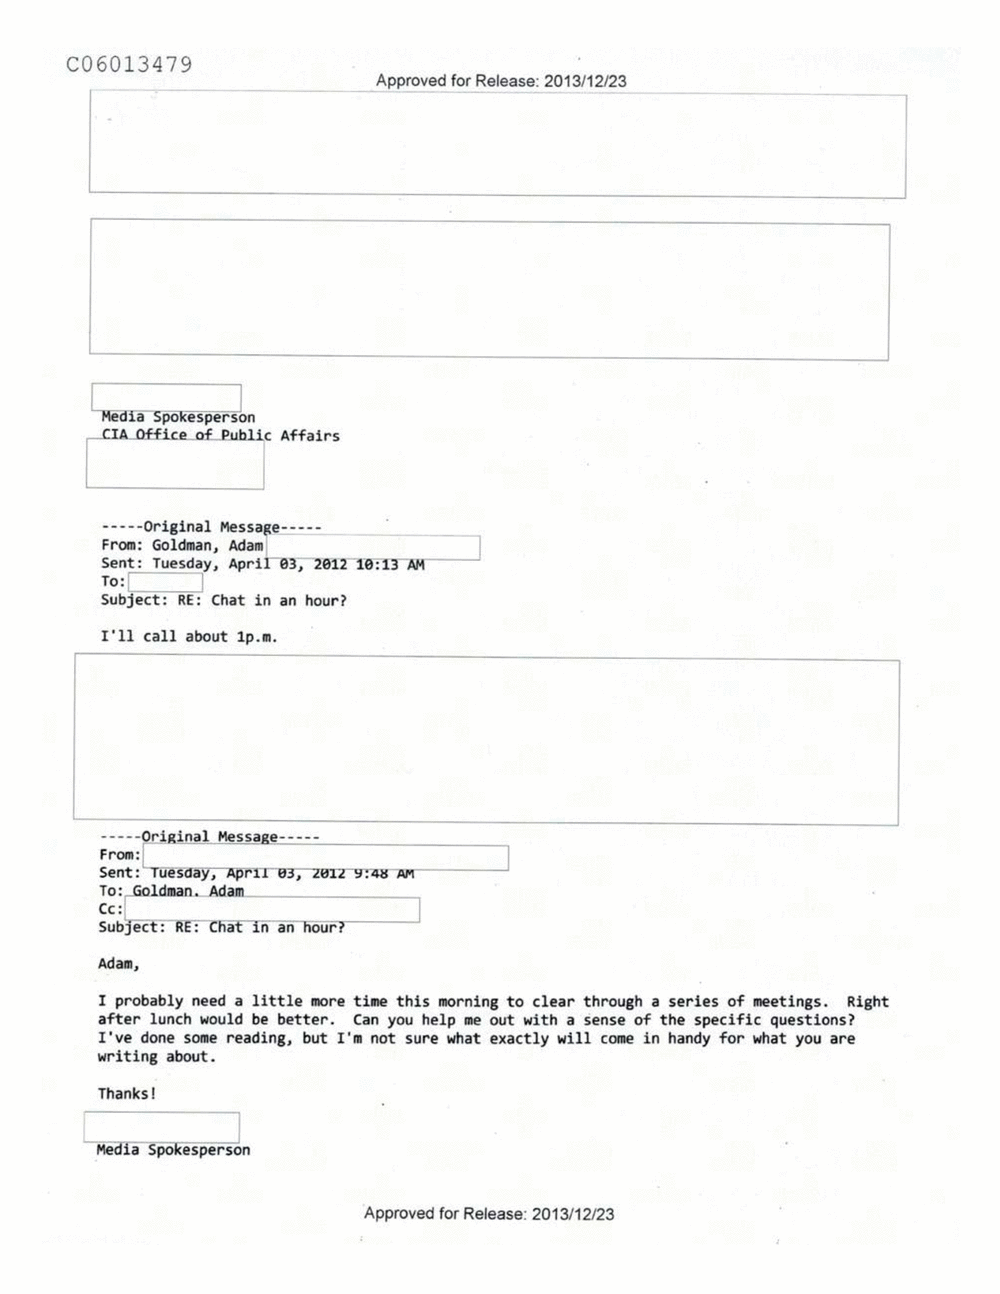 Page 330 from Email Correspondence Between Reporters and CIA Flacks